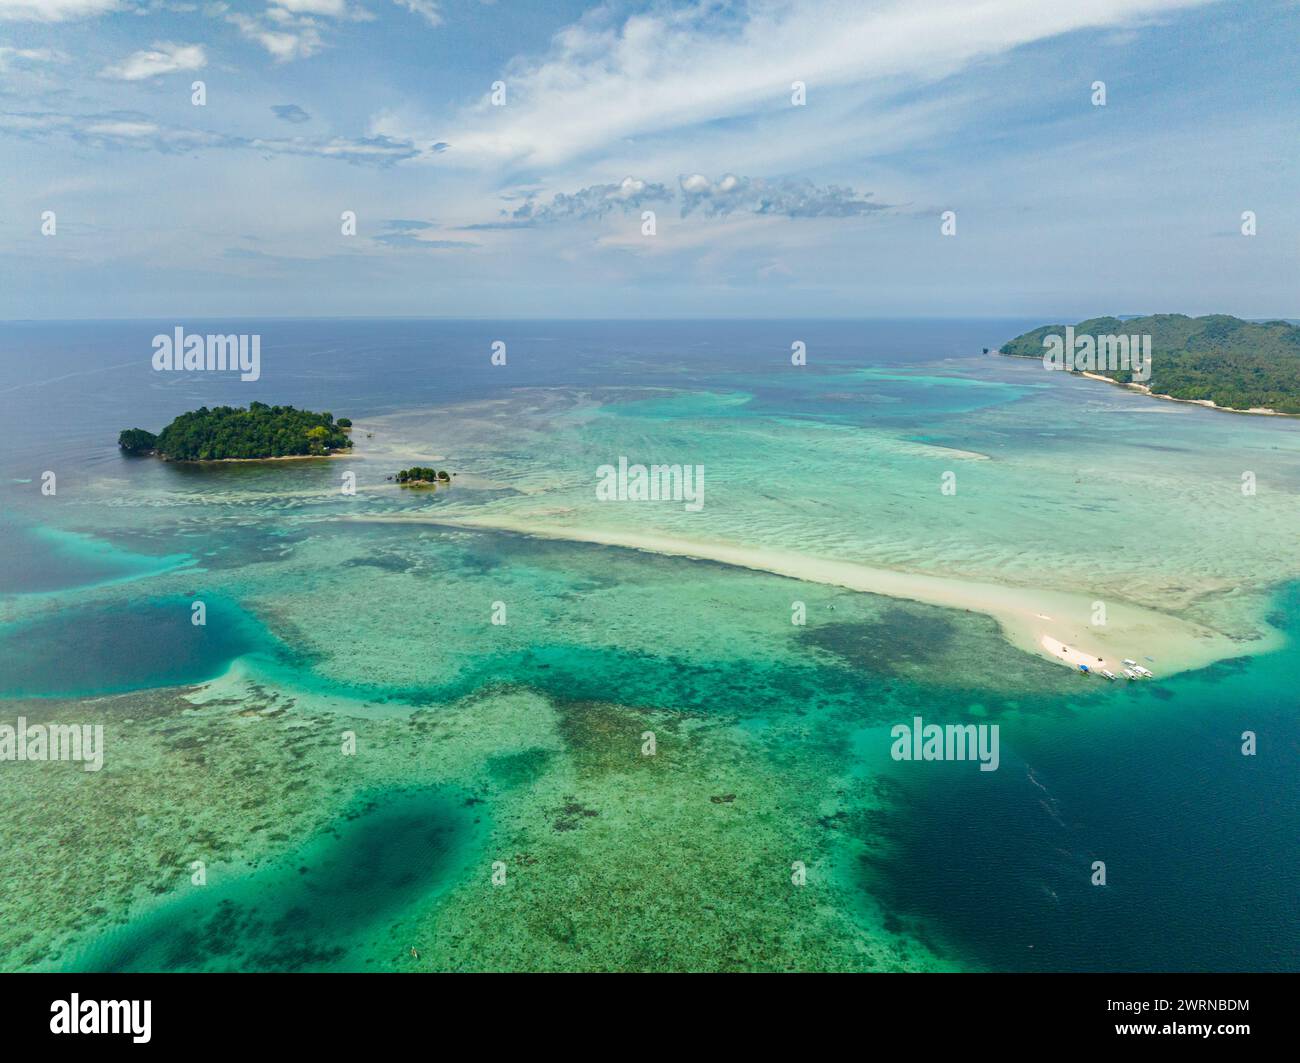 Drone view of Vanishing Island and Turtle Island surrounded by turquoise water. Barobo, Surigao del Sur. Philippines. Stock Photo